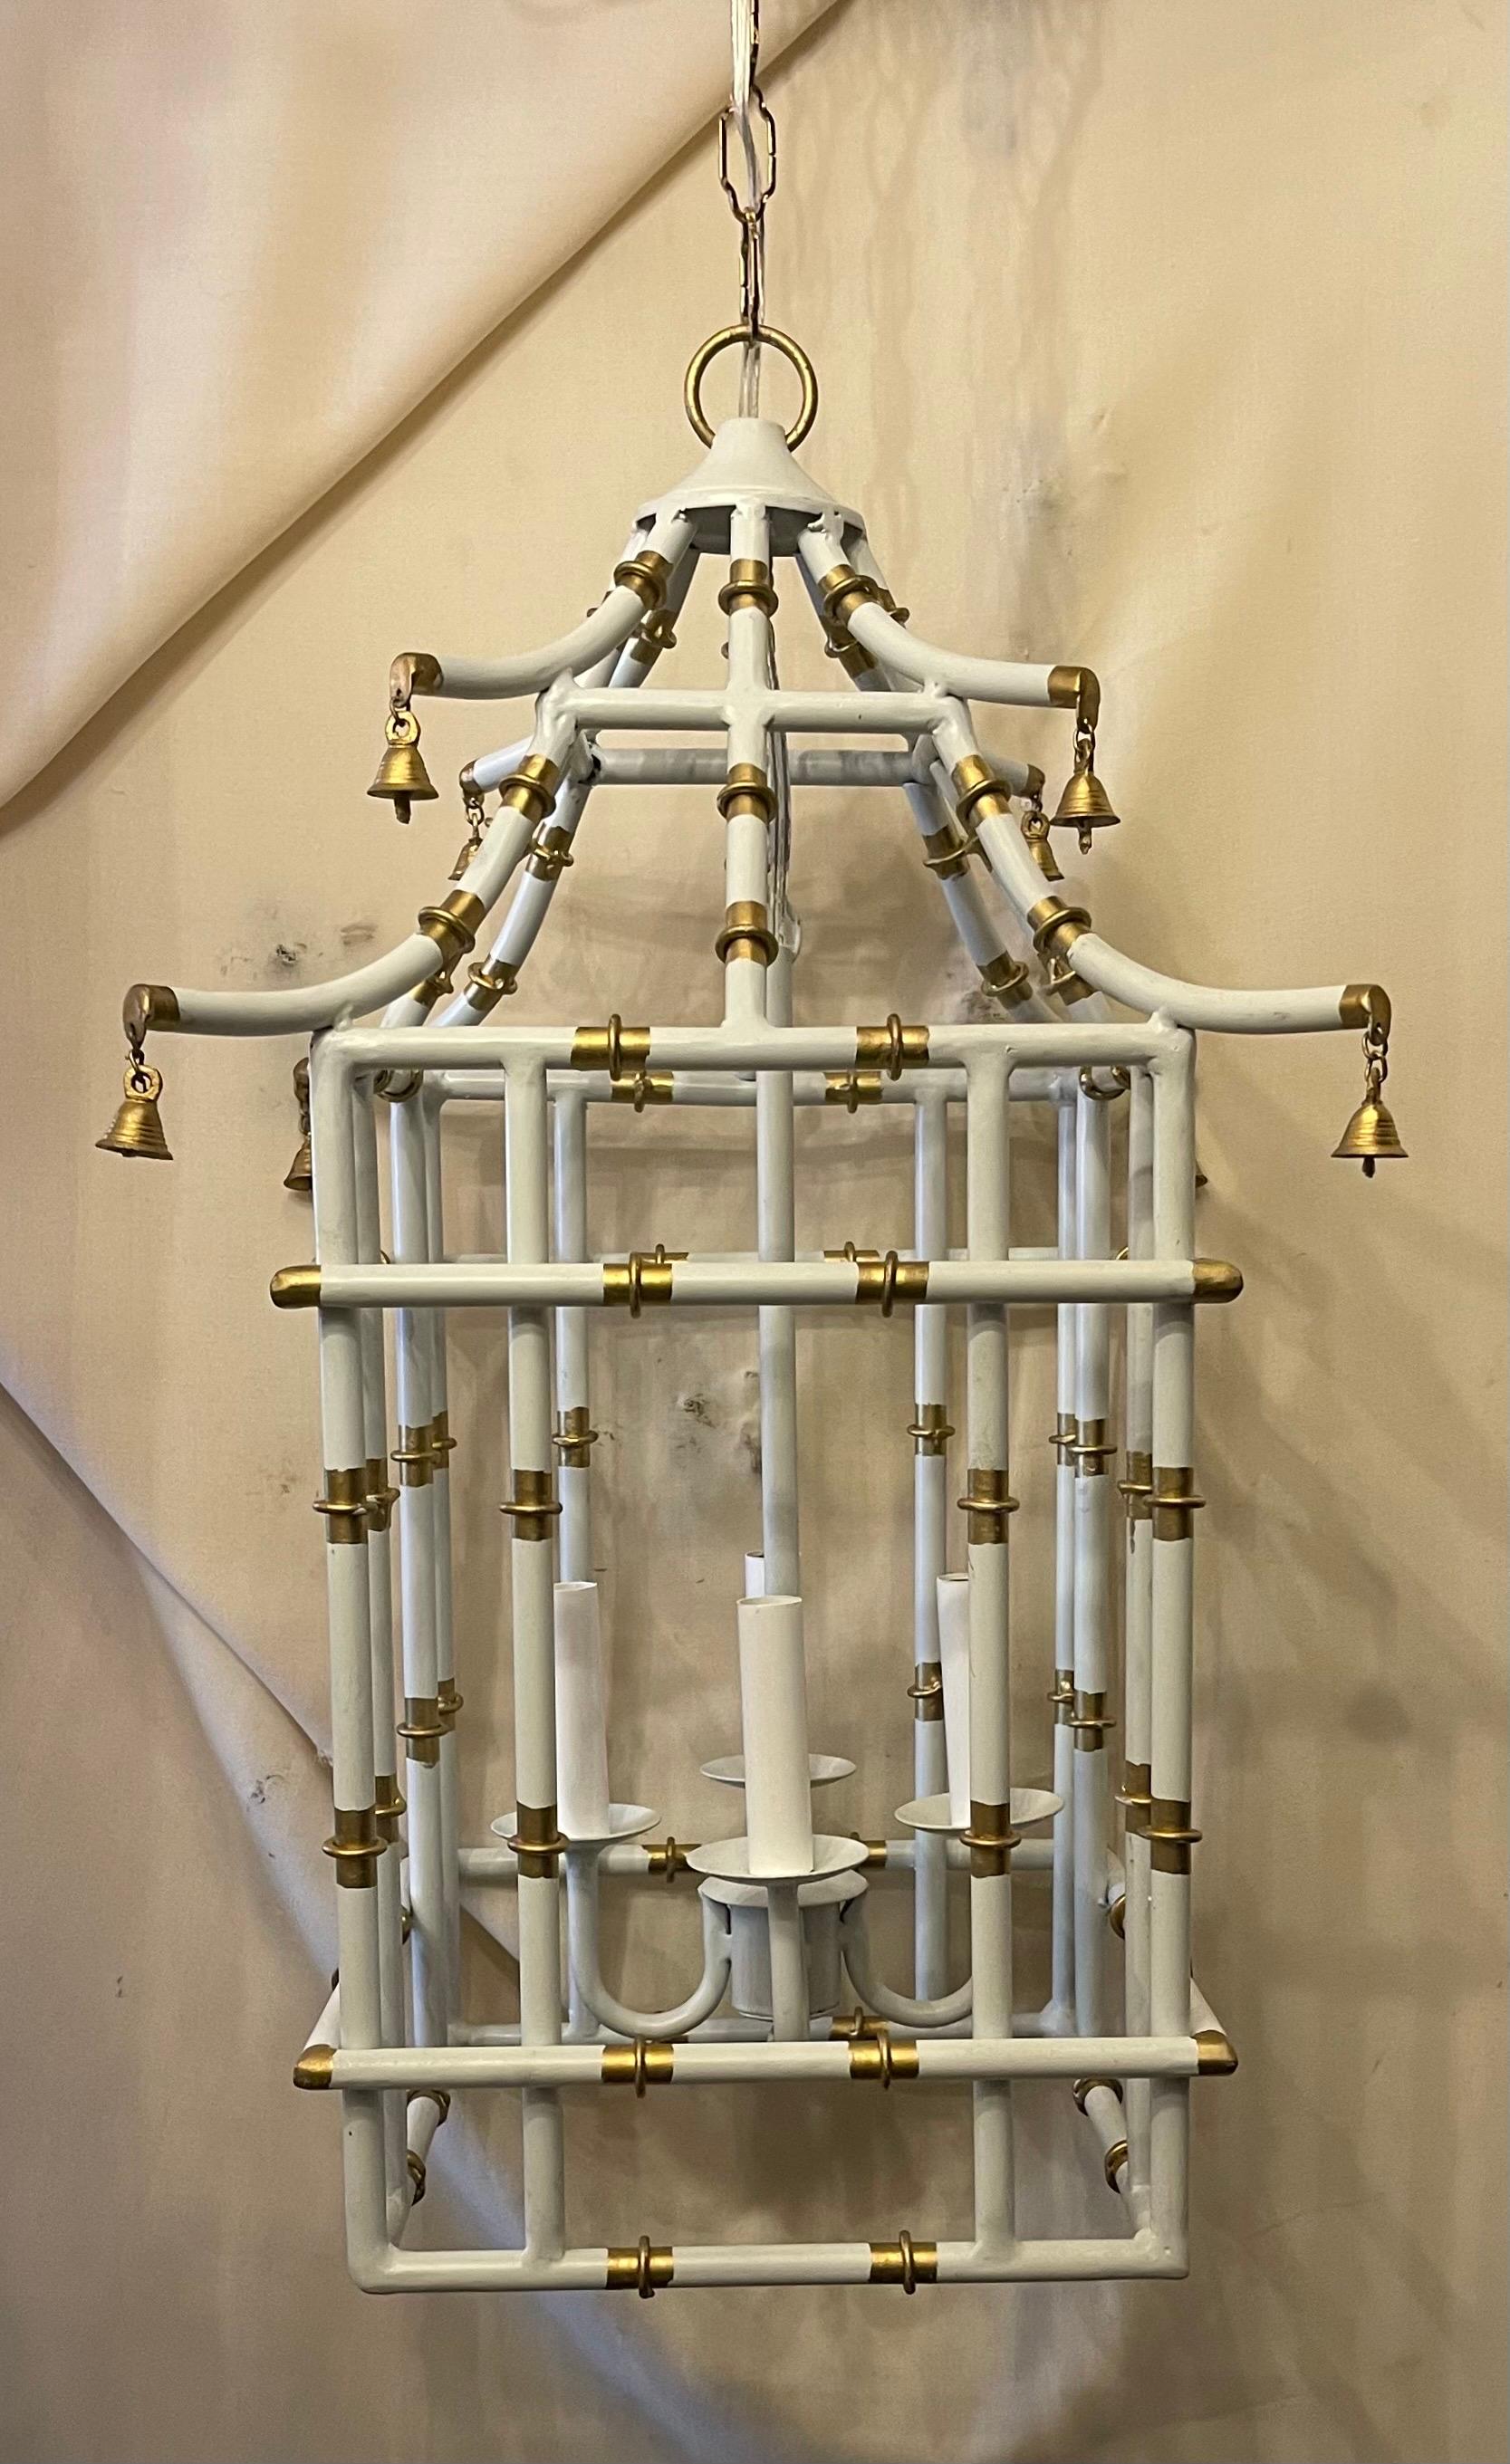 A wonderful painted white & gold gilt pagoda bamboo form chinoiserie lantern fixture with 4 candelabra light cluster each taking up to a 40 watt bulb.
Rewired and ready to install with chain canopy and mounting hardware.